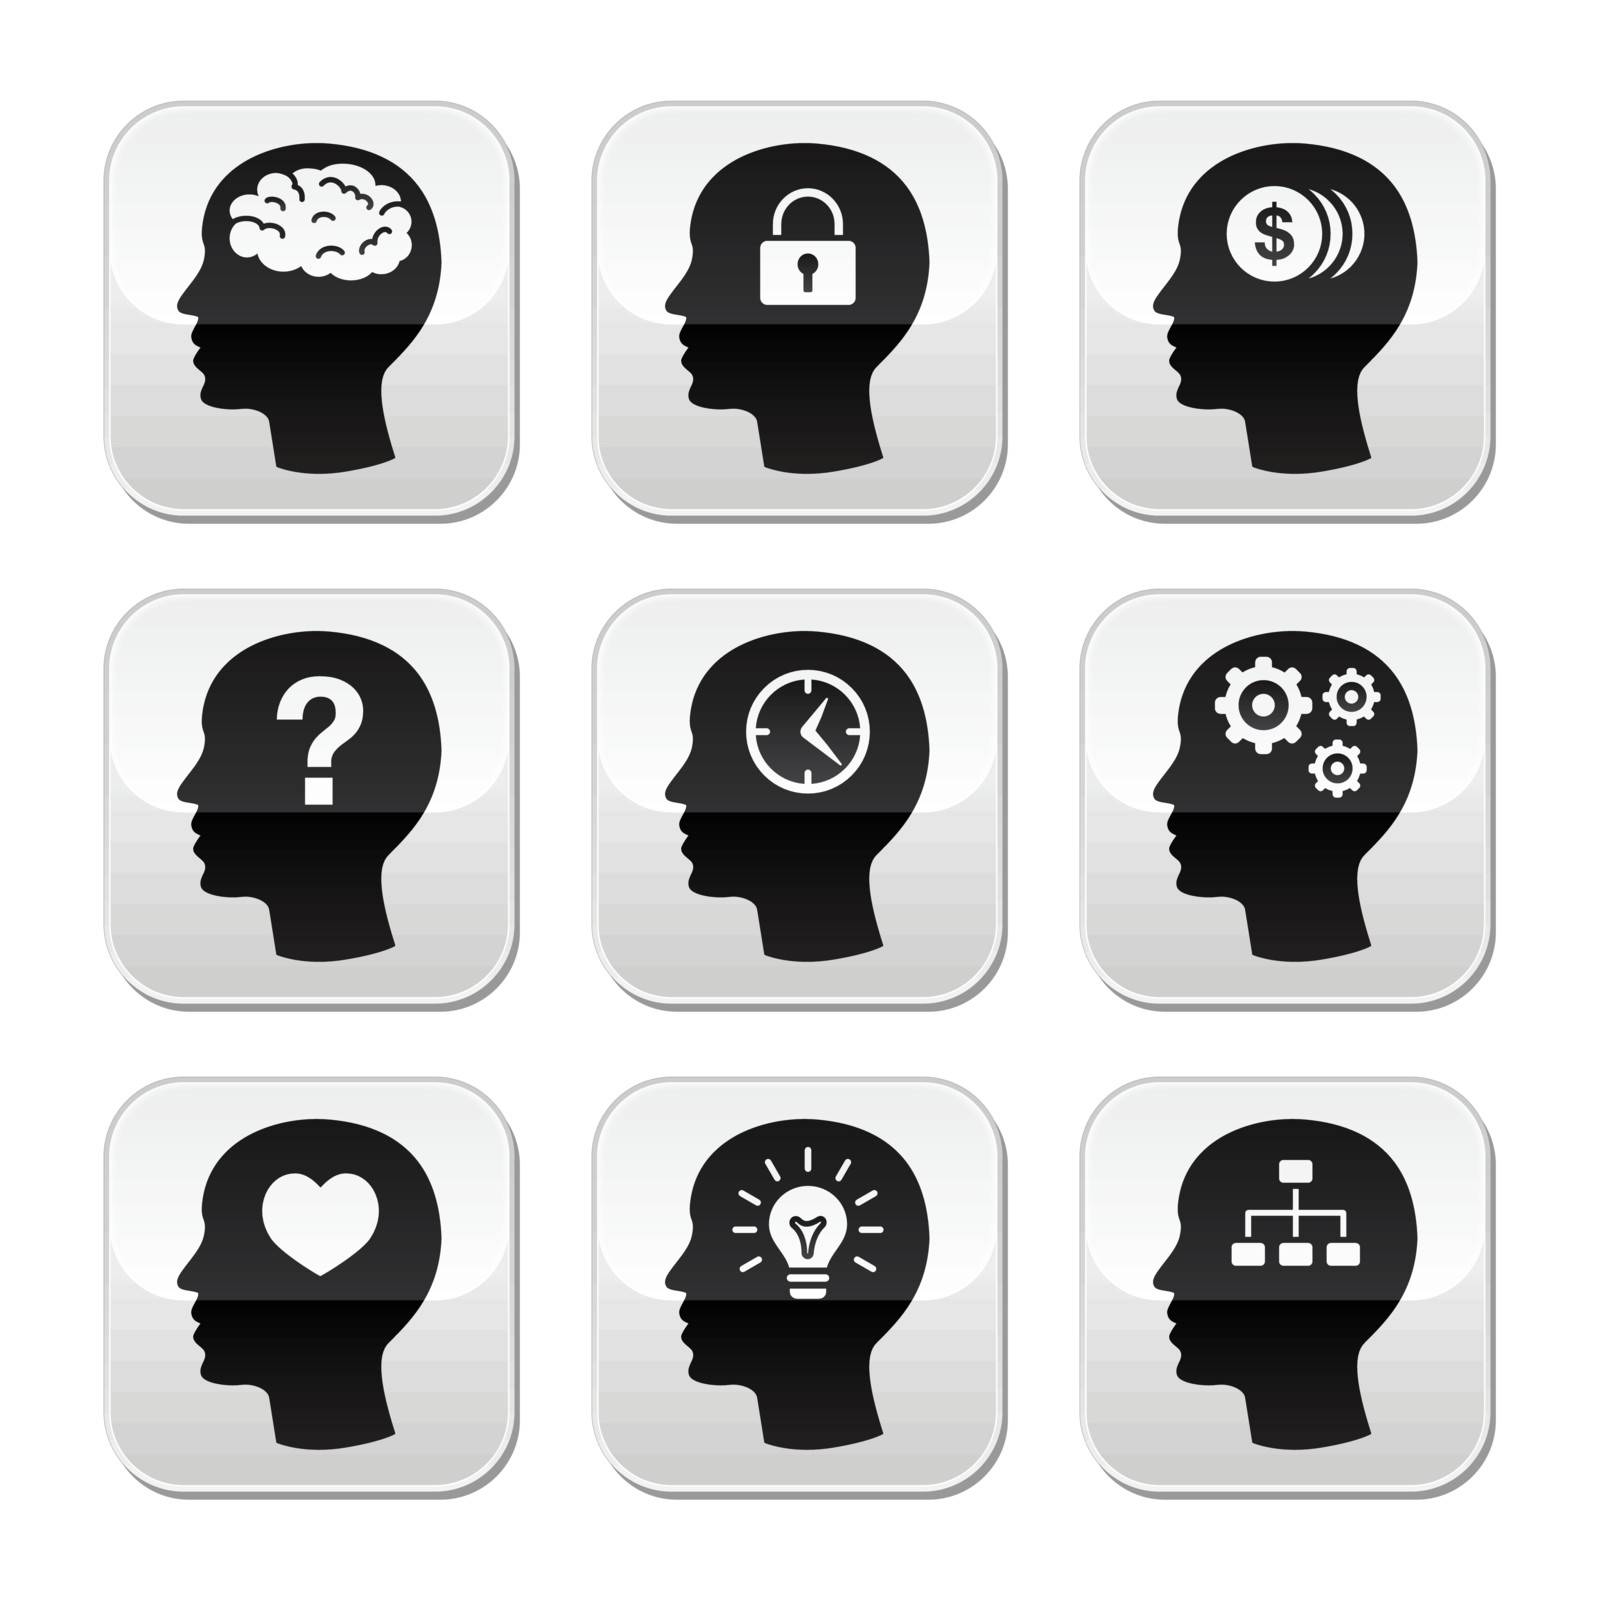 Thinking, creating ideas concept - square grey head buttons isolated on white